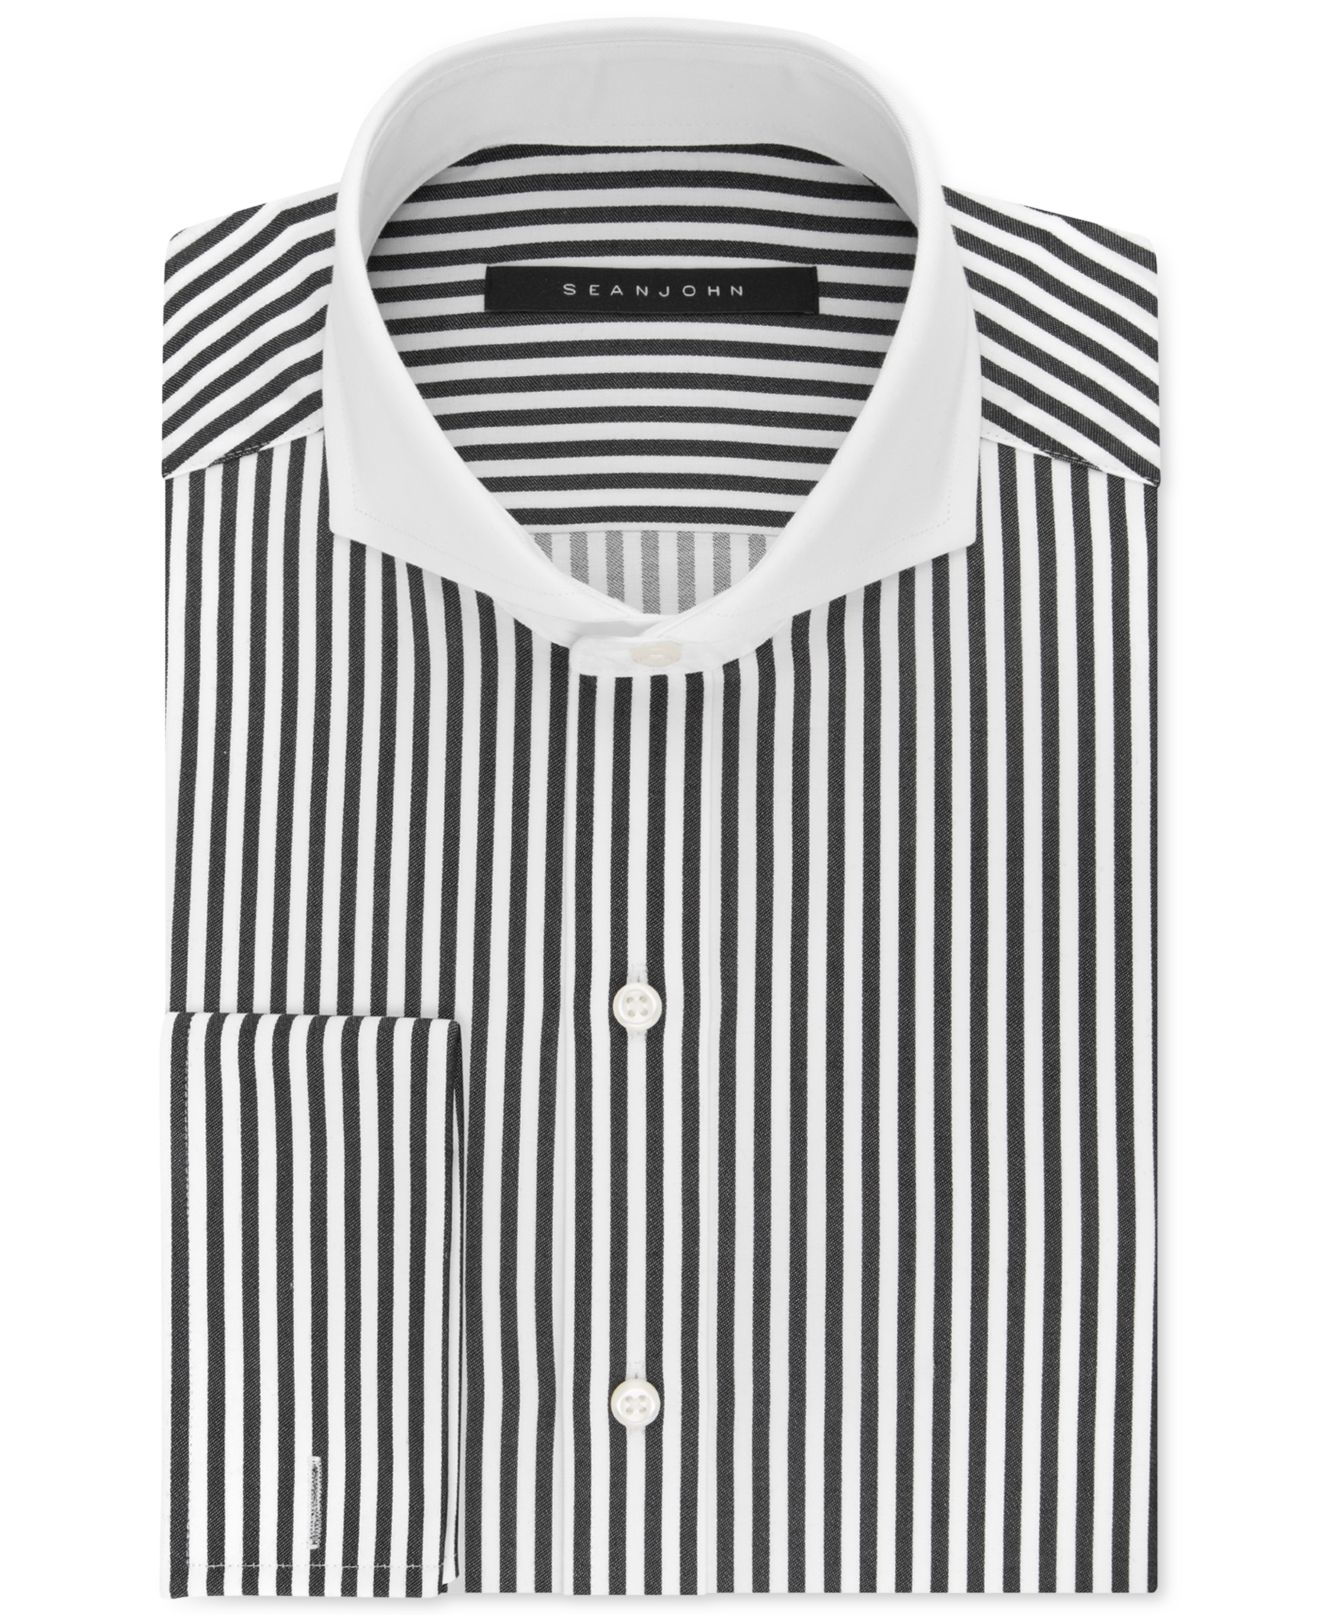 Mens Black And White Striped Dress Shirt With White Collar ~ Collar ...